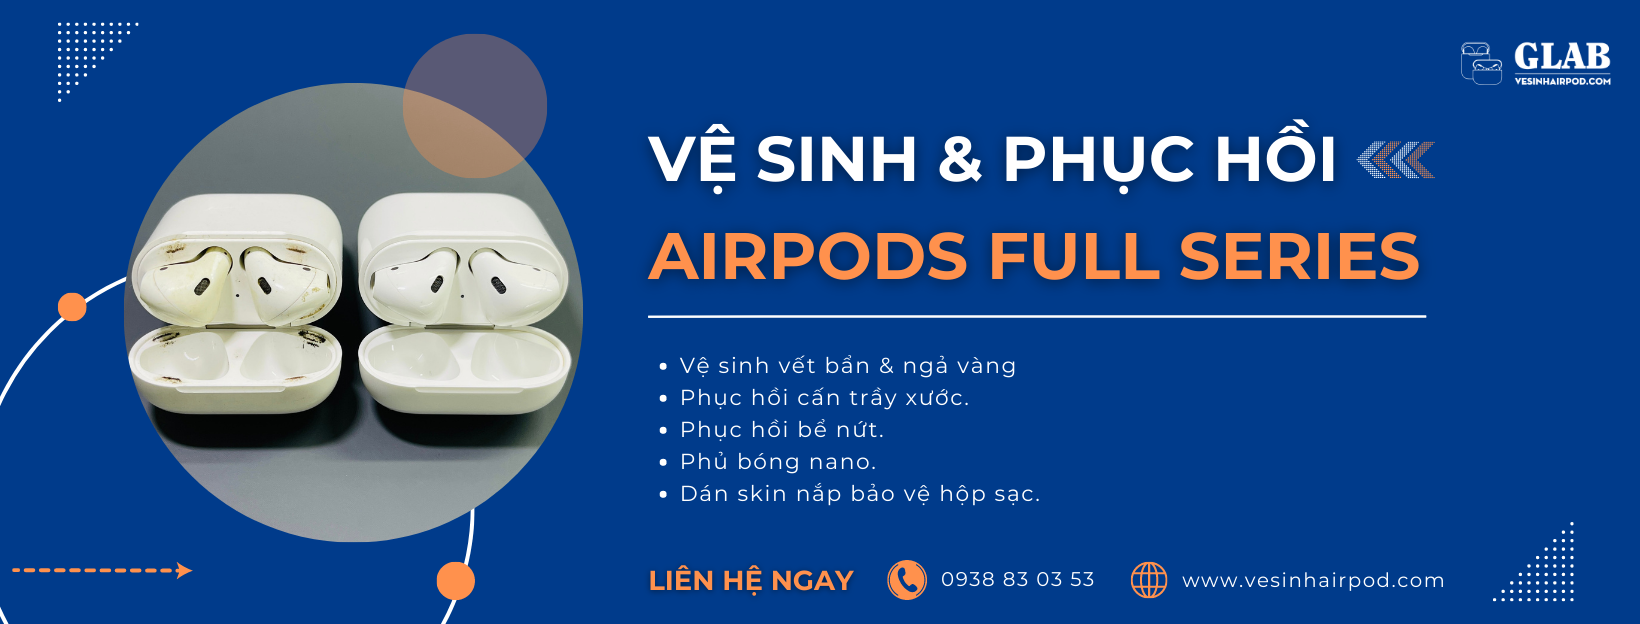 ve-sinh-airpods